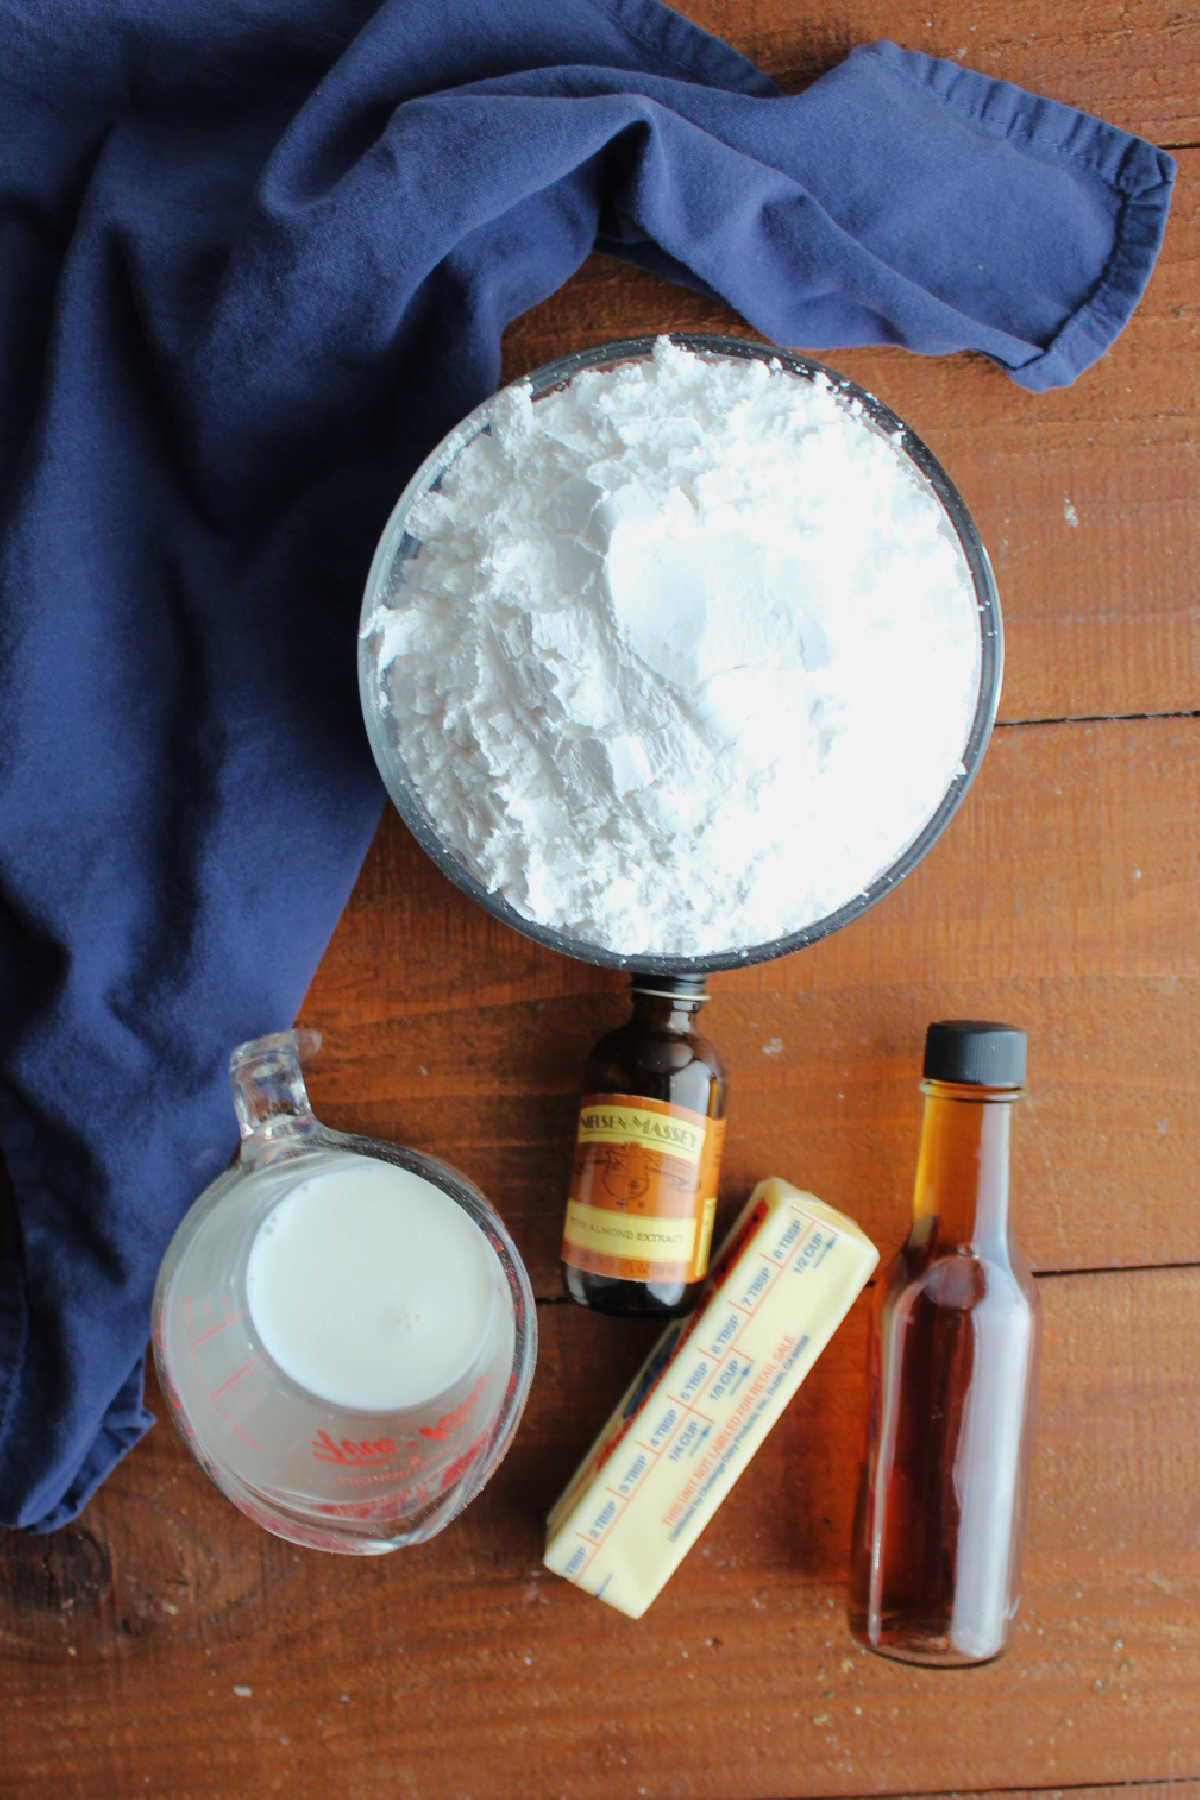 Vanilla icing ingredients including powdered sugar, milk, butter, vanilla, and almond extract.